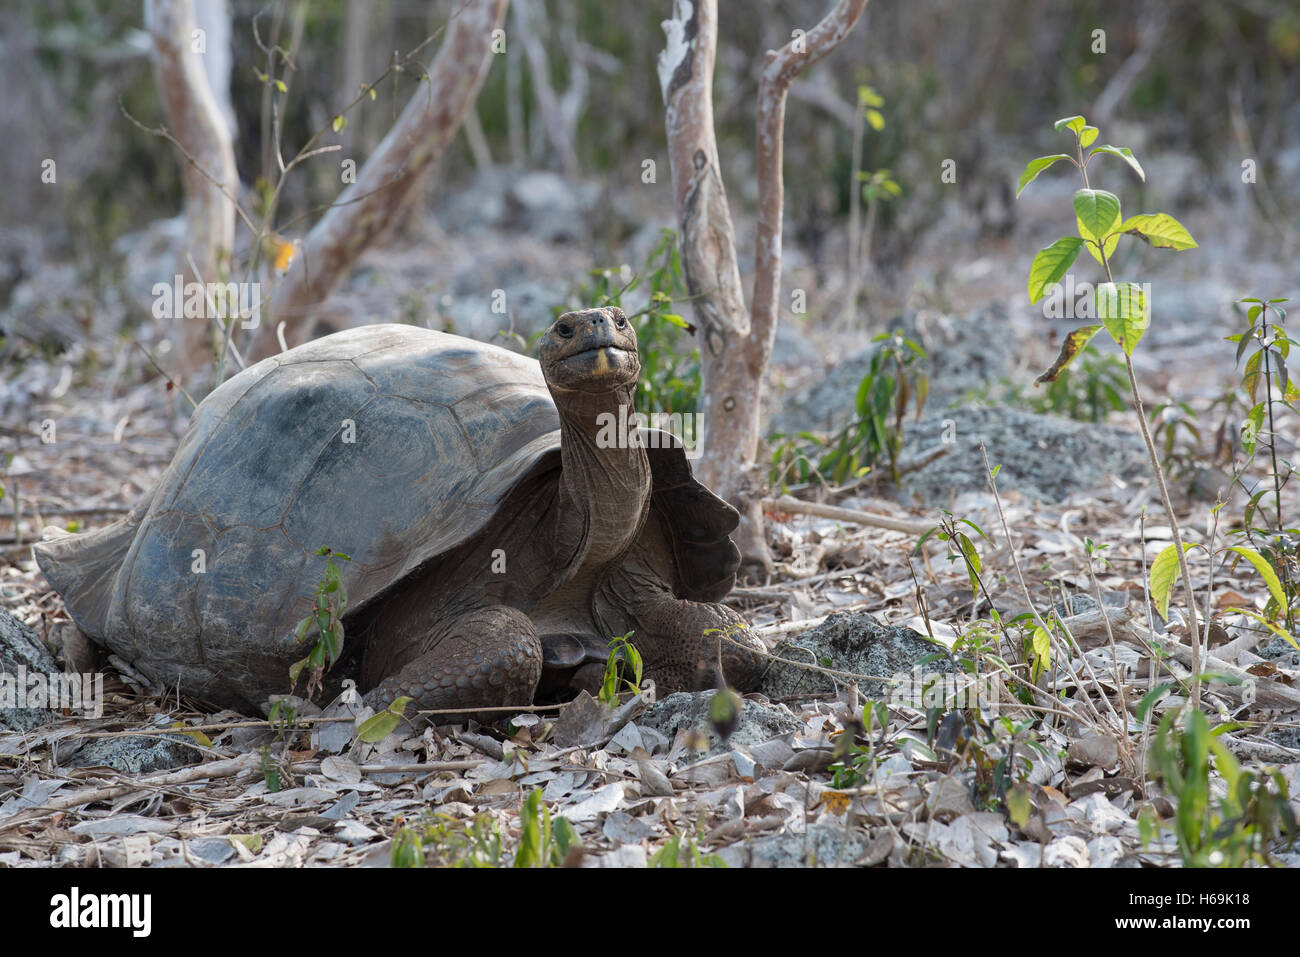 Wild giant tortoise in natural environment on Galapagos island, wildlife conservation scene of endangered turtle species. Stock Photo